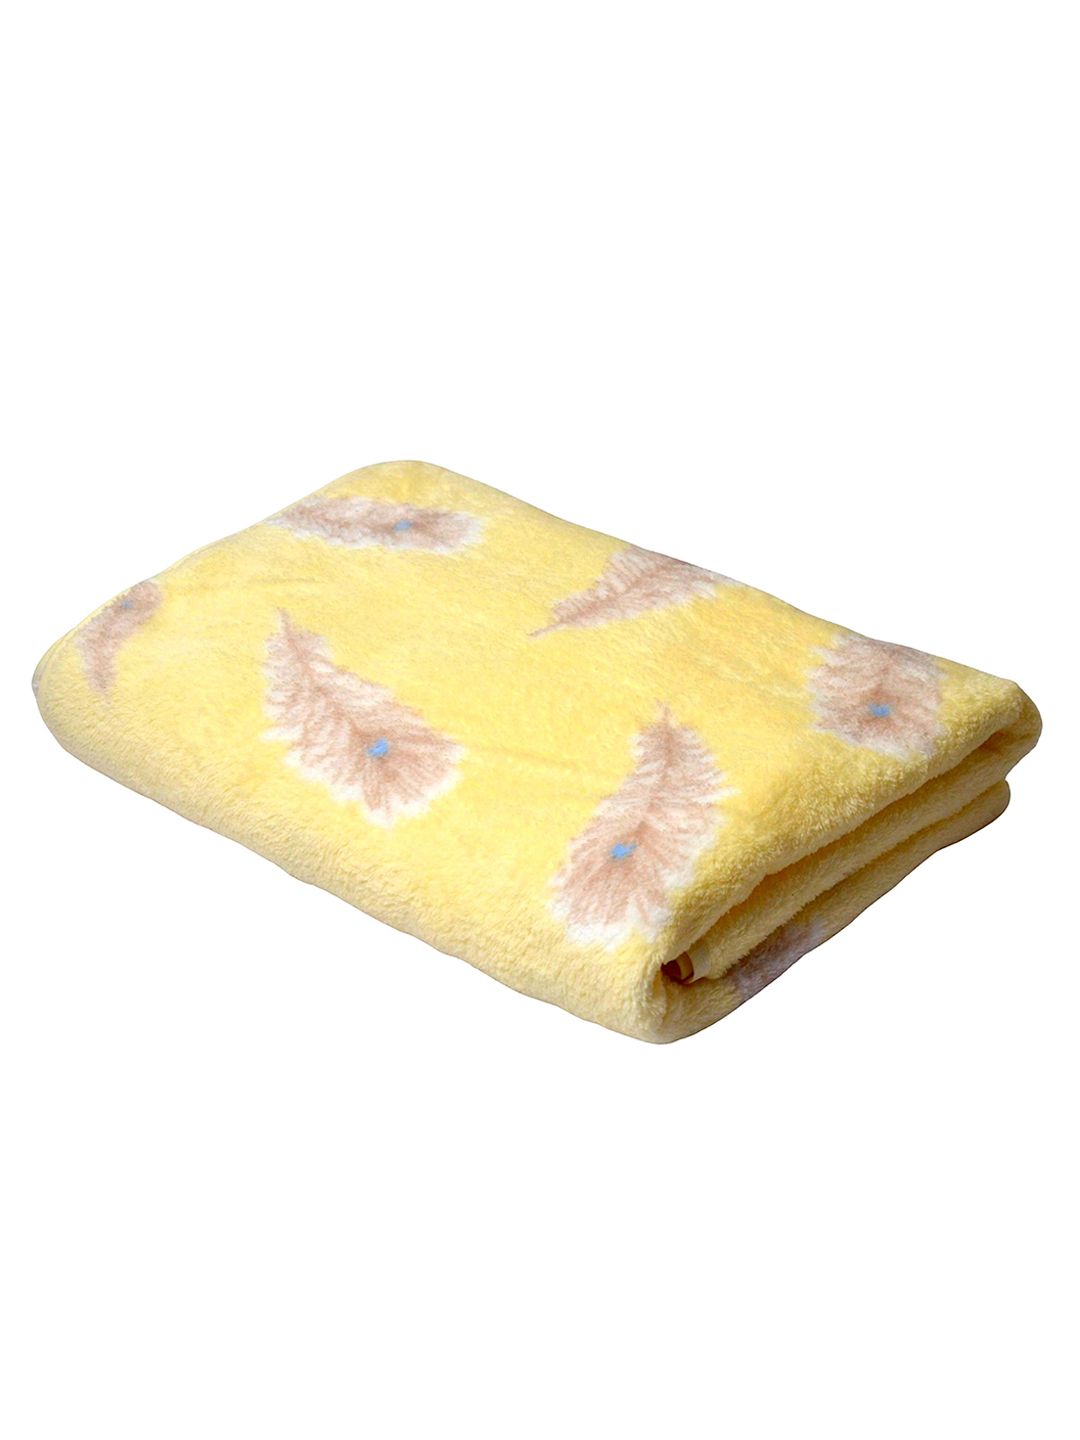 Tranquil square Unisex Yellow Printed 650 GSM Cotton Bath Towels Price in India